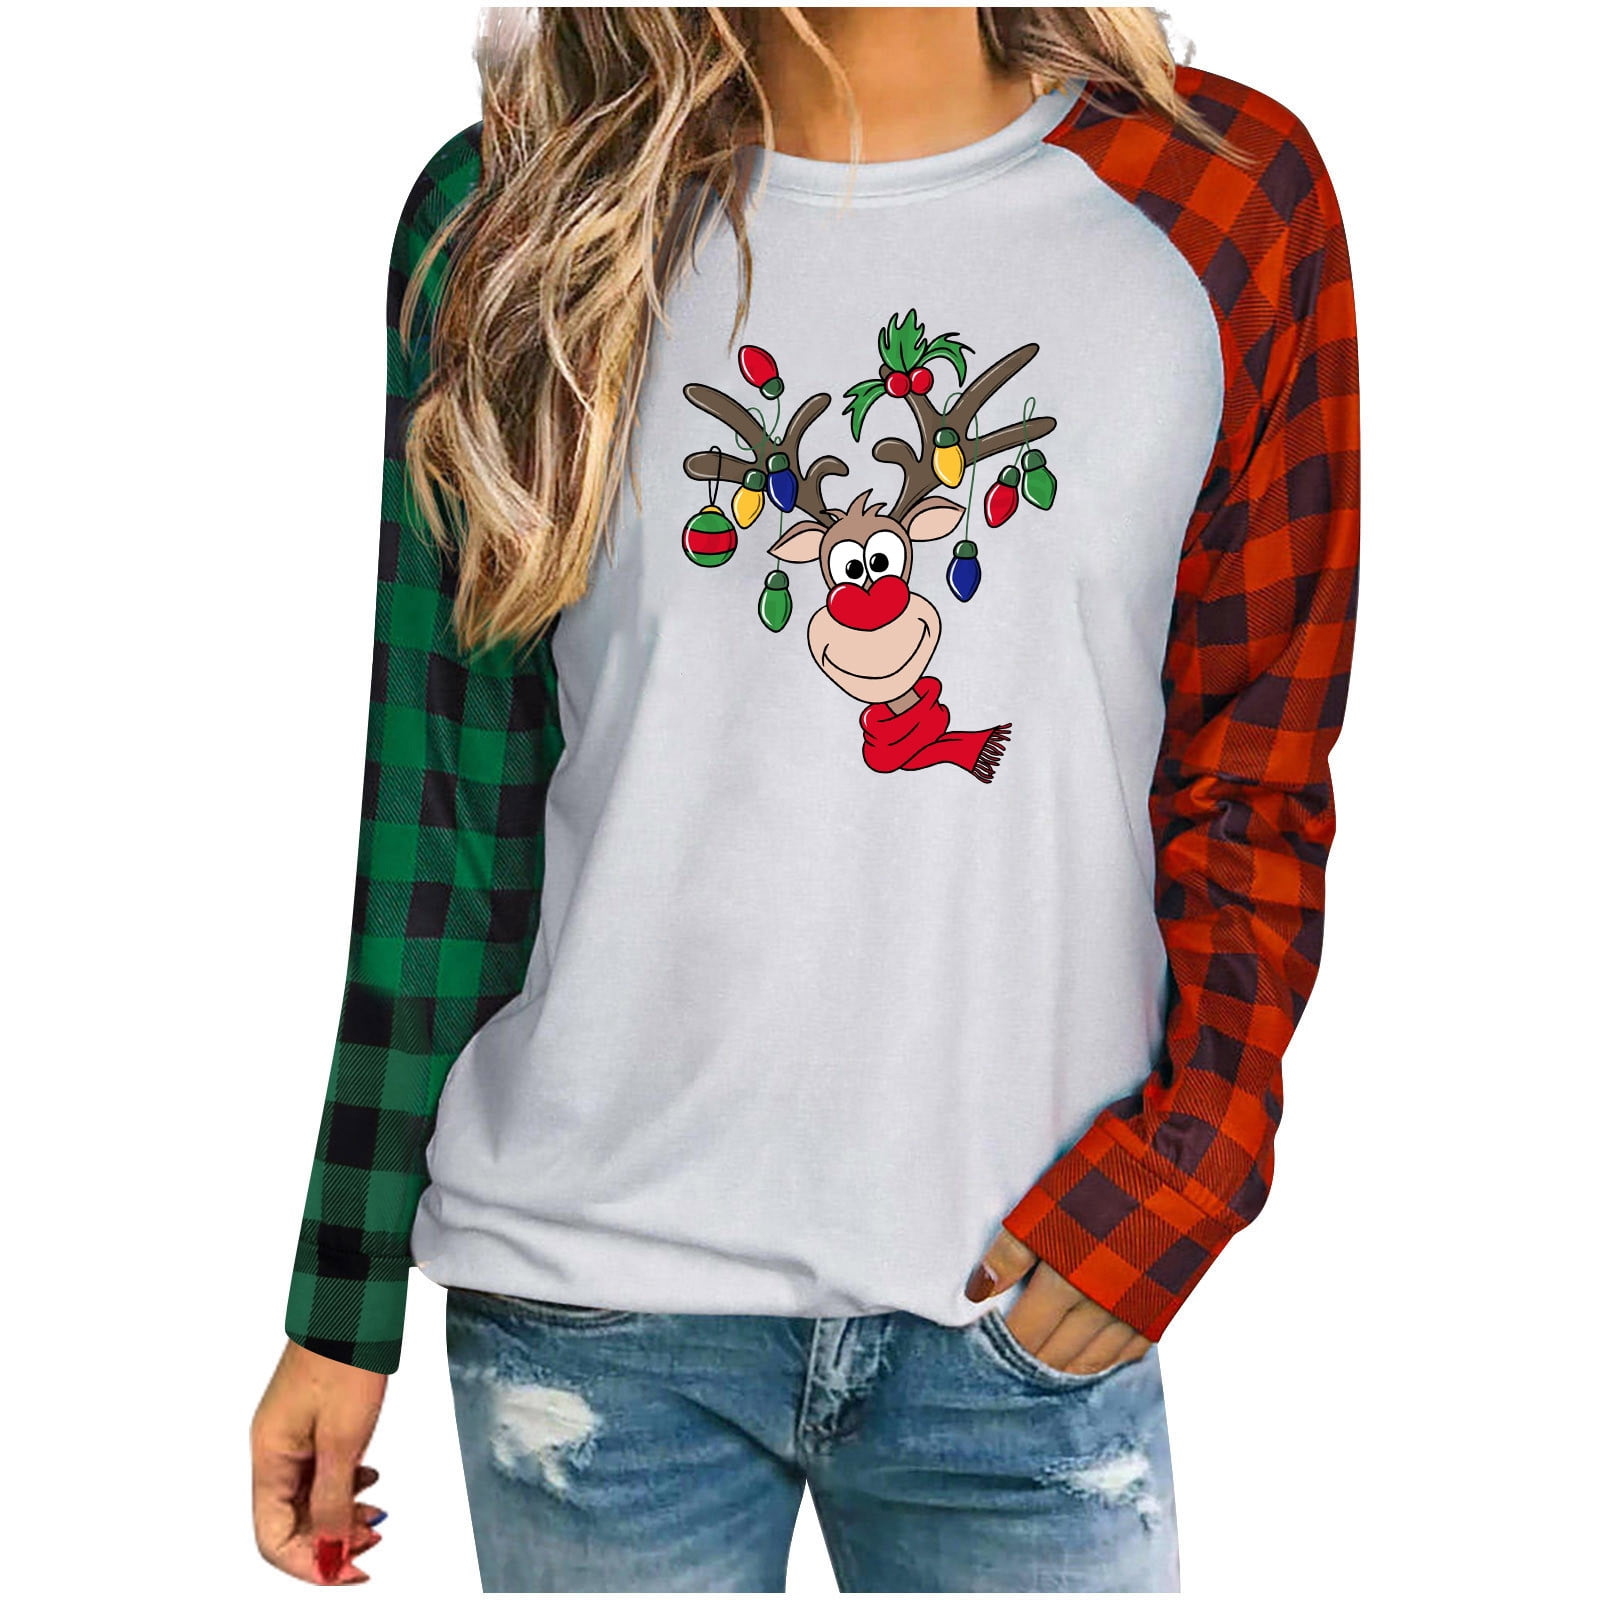 Women Casual Gradient Print T Shirt Long Sleeve Shirt Loose,Dollar Items ,Fall,one Day delivery Items Prime,Under 5 Dollar Items for Women